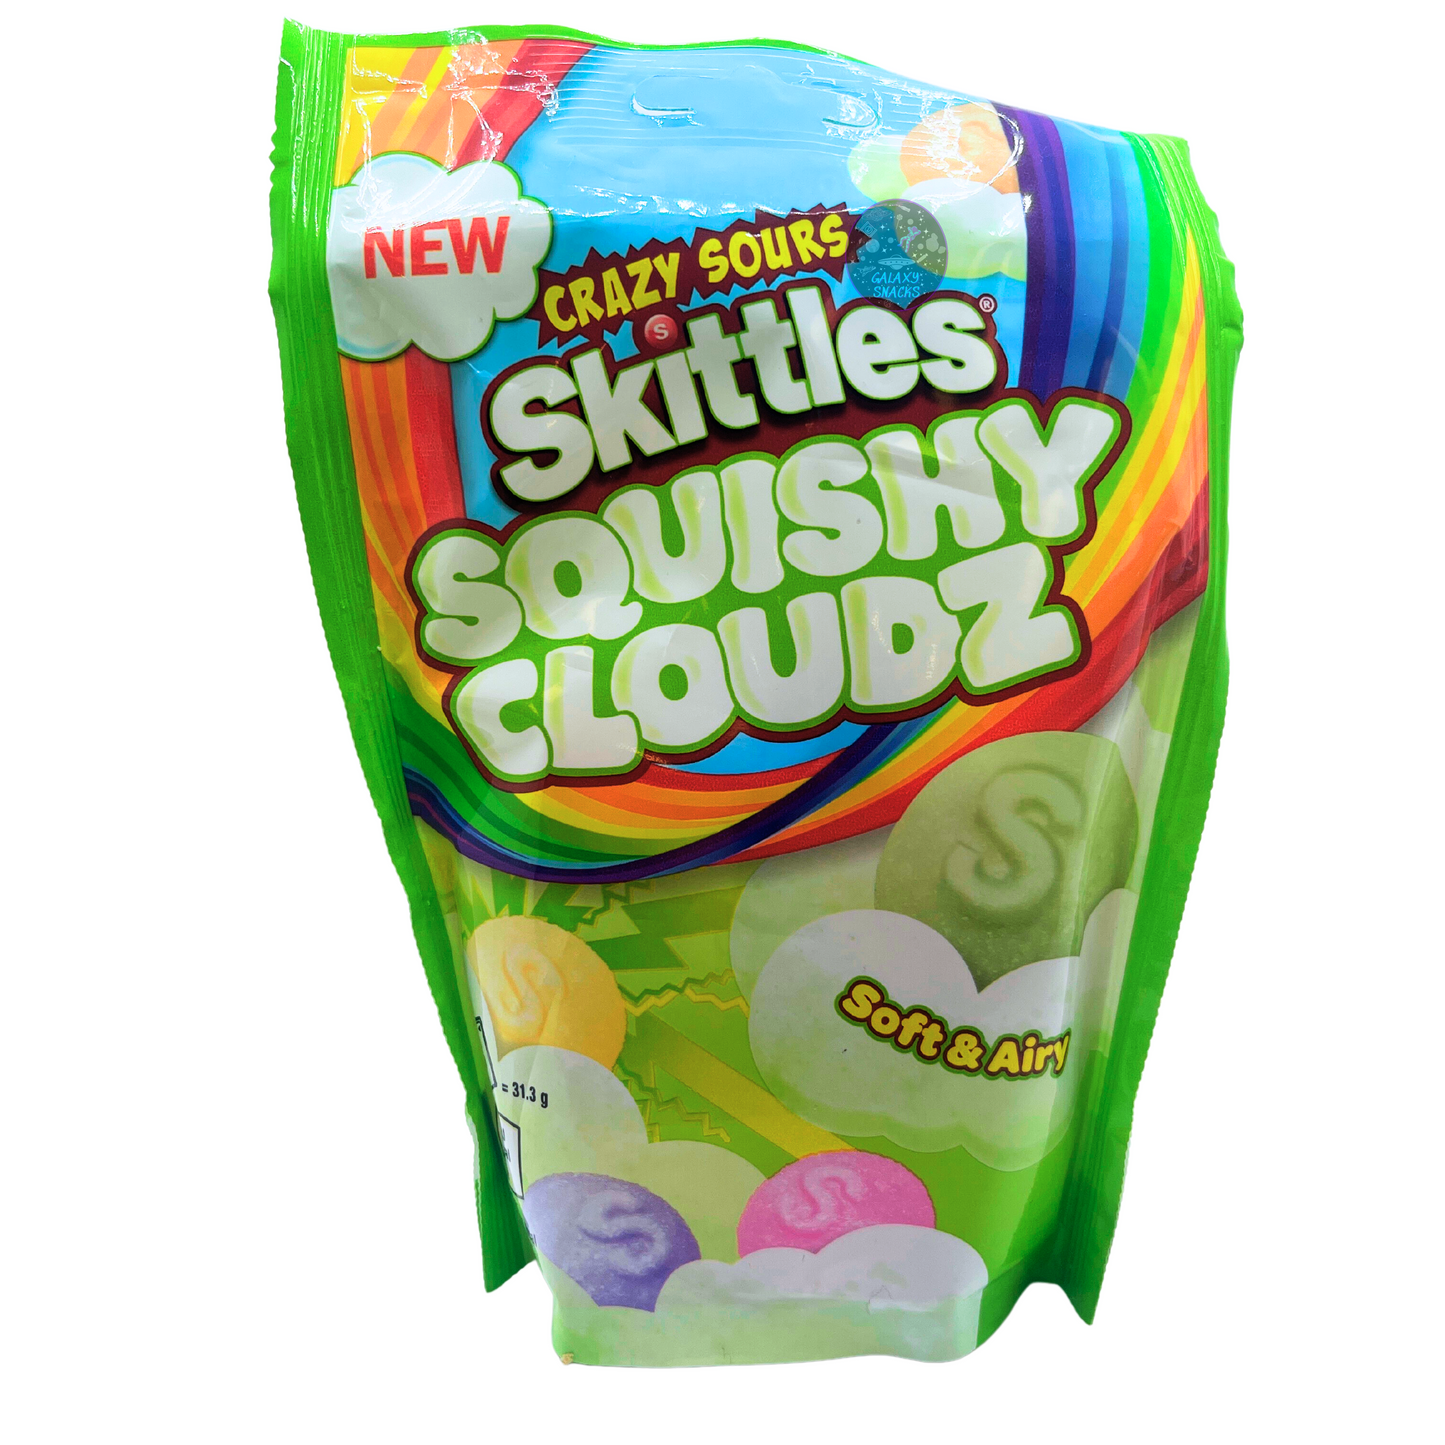 Skittles Sour Squishy Clouds (UK)